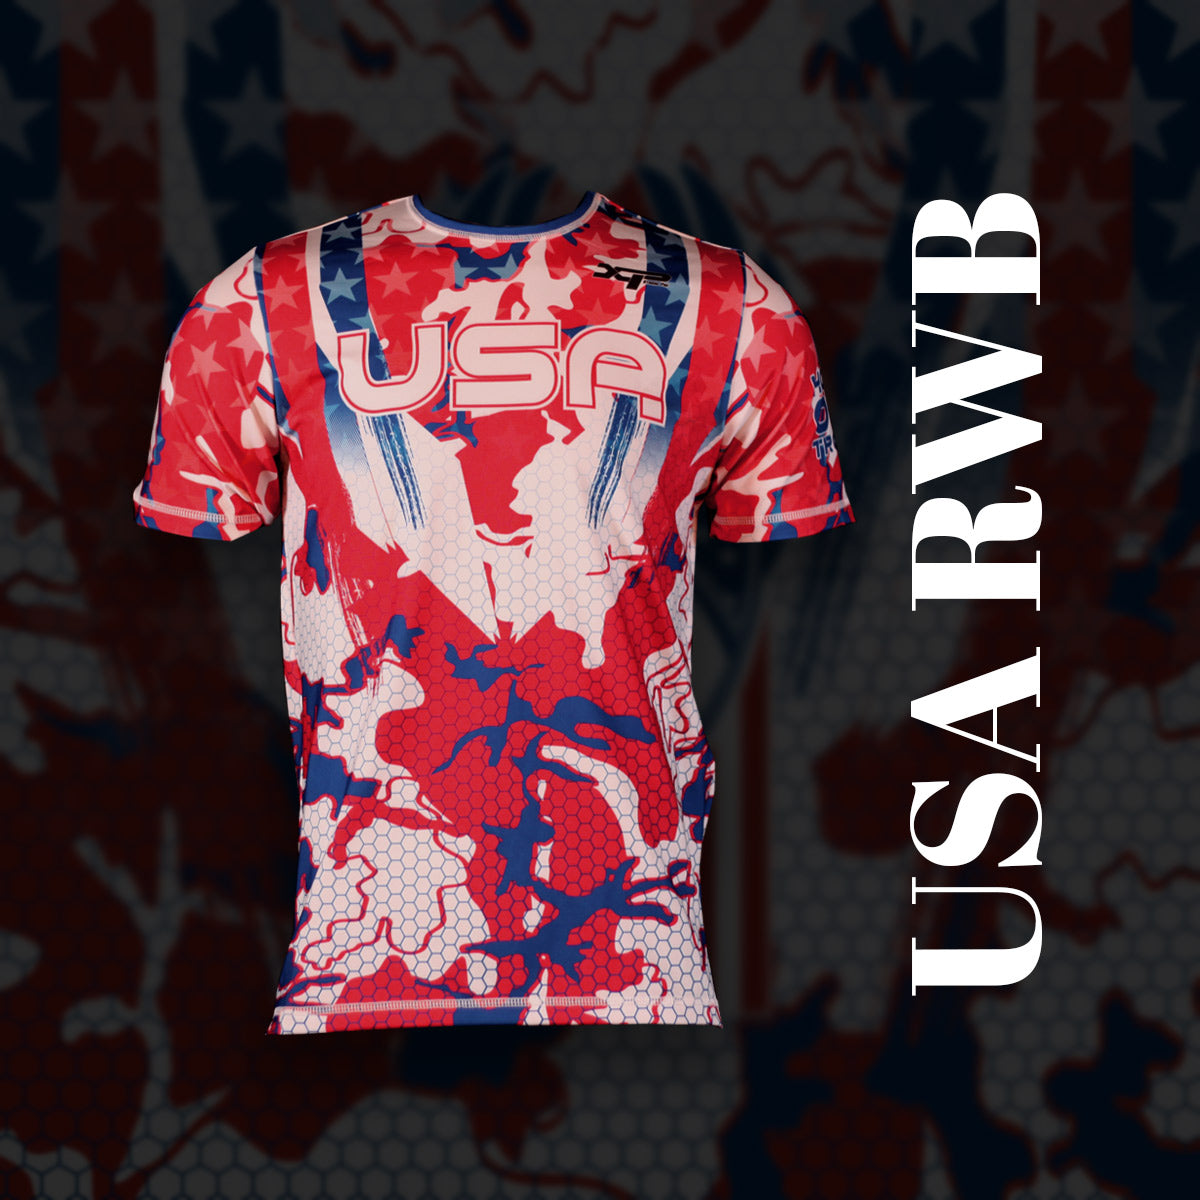 USA Red, White and Blue Compression Shirt Xtreme Pro Apparel